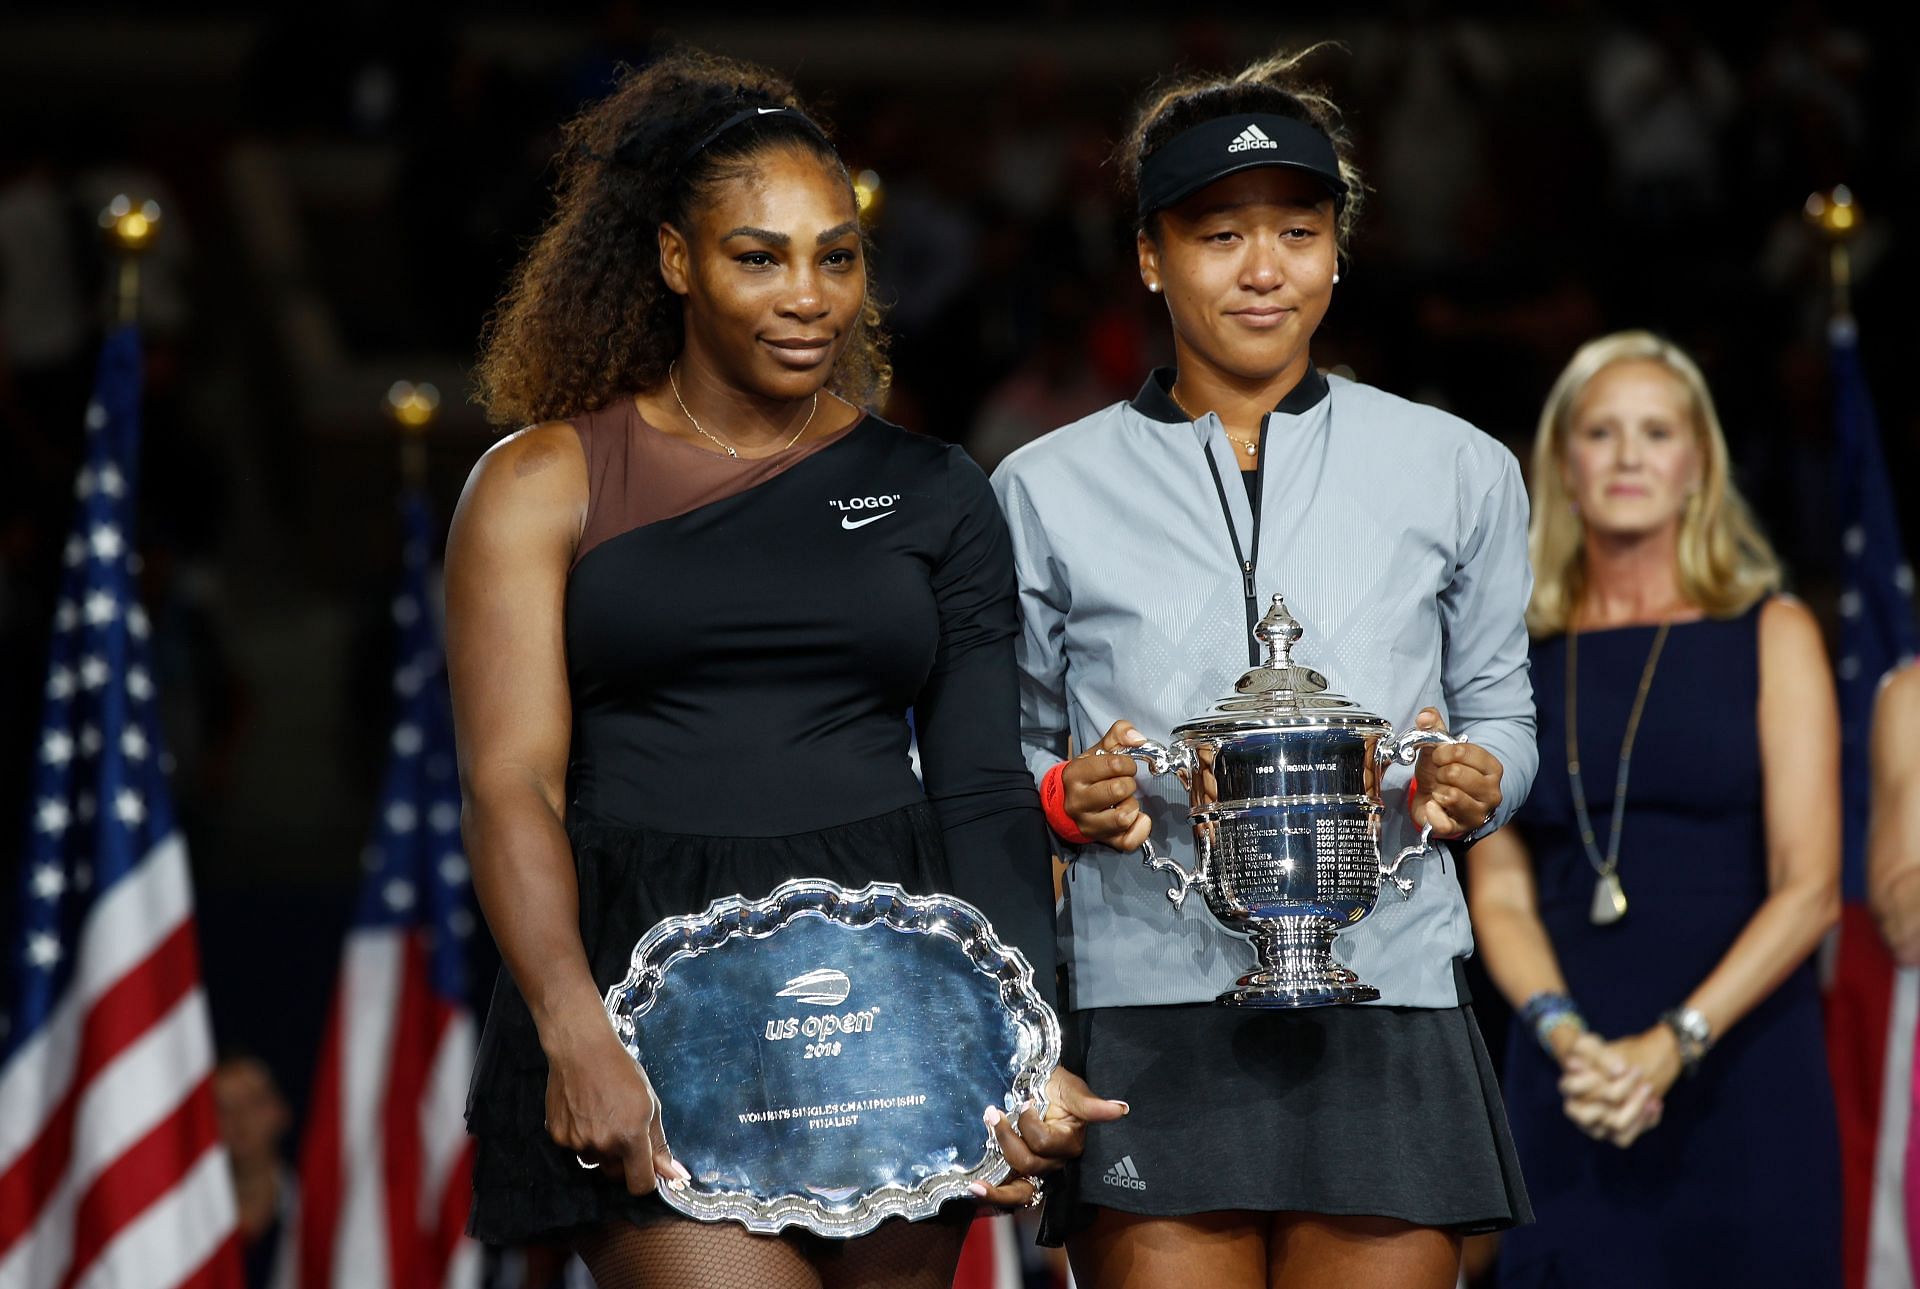 Serena Williams (left) is a runner-up to Naomi Osaka (right) at the 2018 US Open.